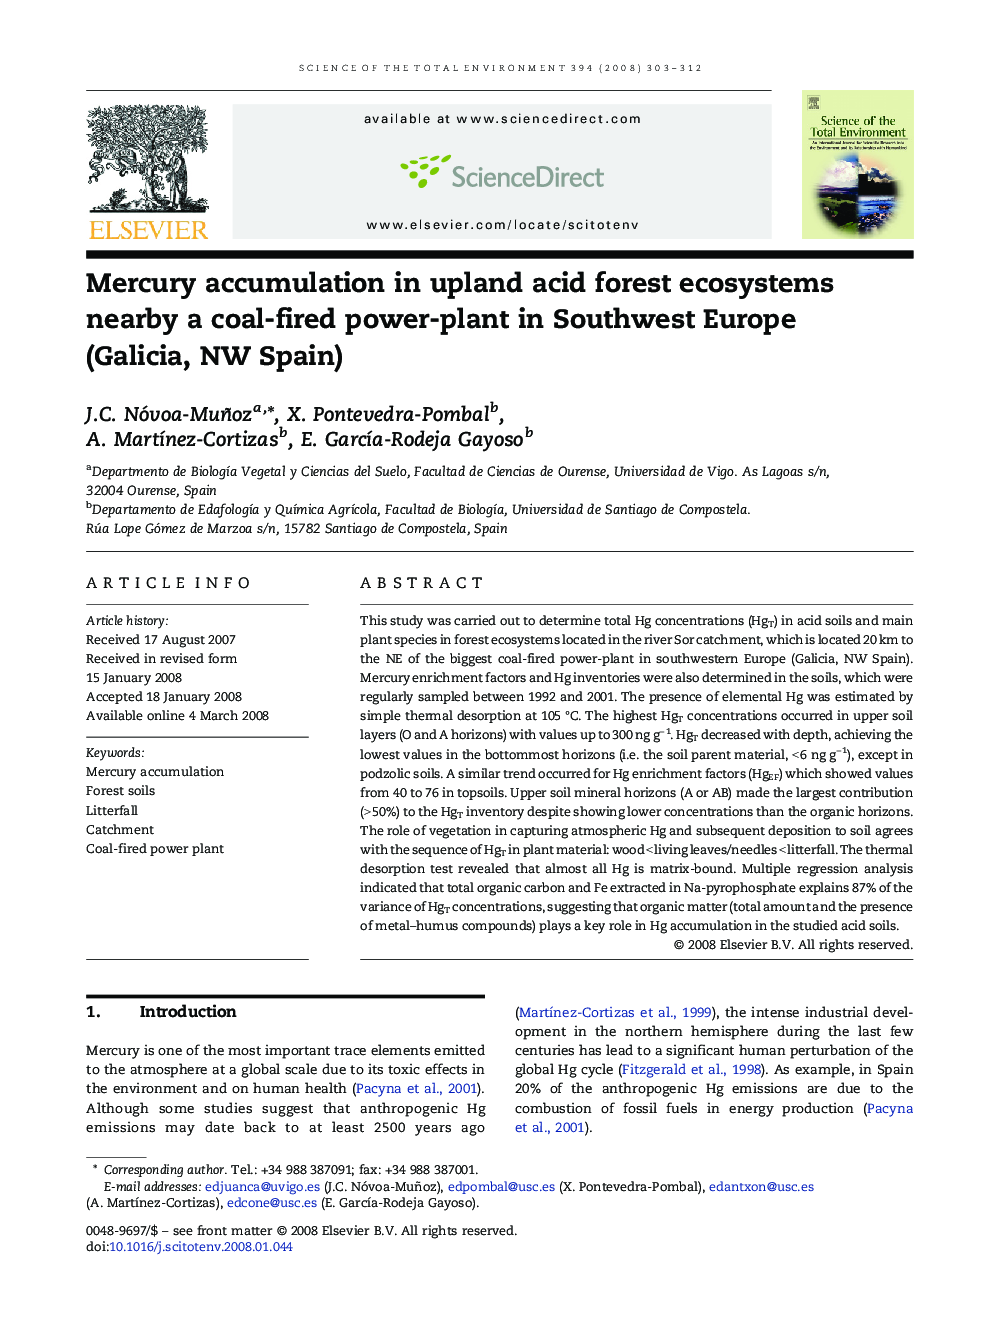 Mercury accumulation in upland acid forest ecosystems nearby a coal-fired power-plant in Southwest Europe (Galicia, NW Spain)